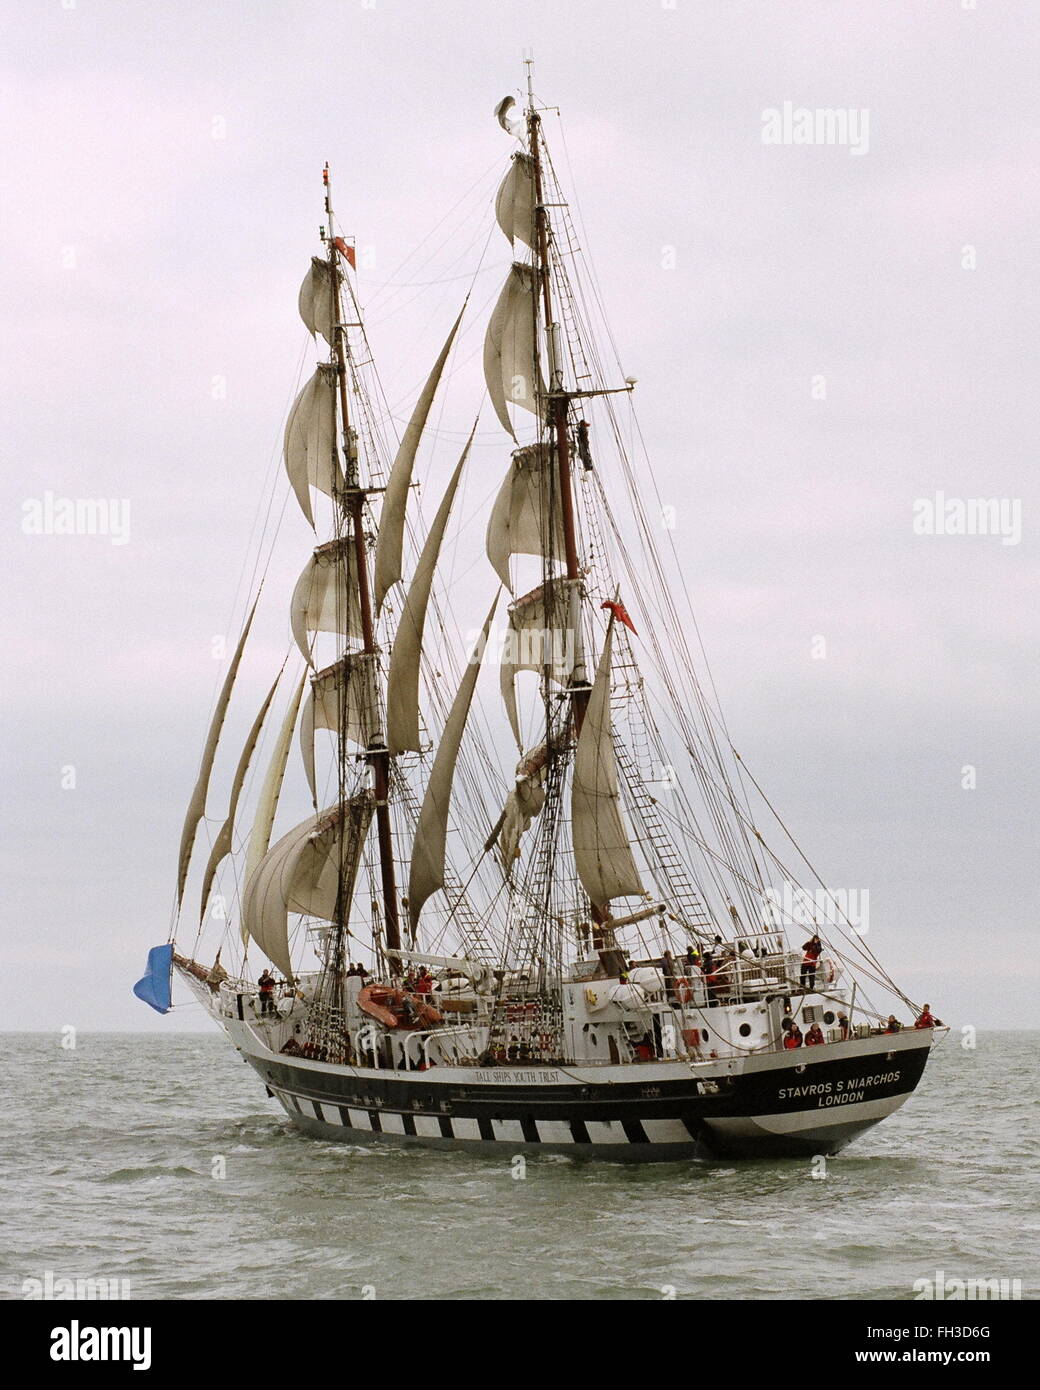 AJAXNETPHOTO. 2006. AT SEA, CHANNEL. - OCEAN YOUTH TRUST TALL SHIP STAVROS NIARCHOS UNDER SAIL IN THE ENGLISH CHANNEL. PHOTO:JONATHAN EASTLAND/AJAX  REF:630013 Stock Photo